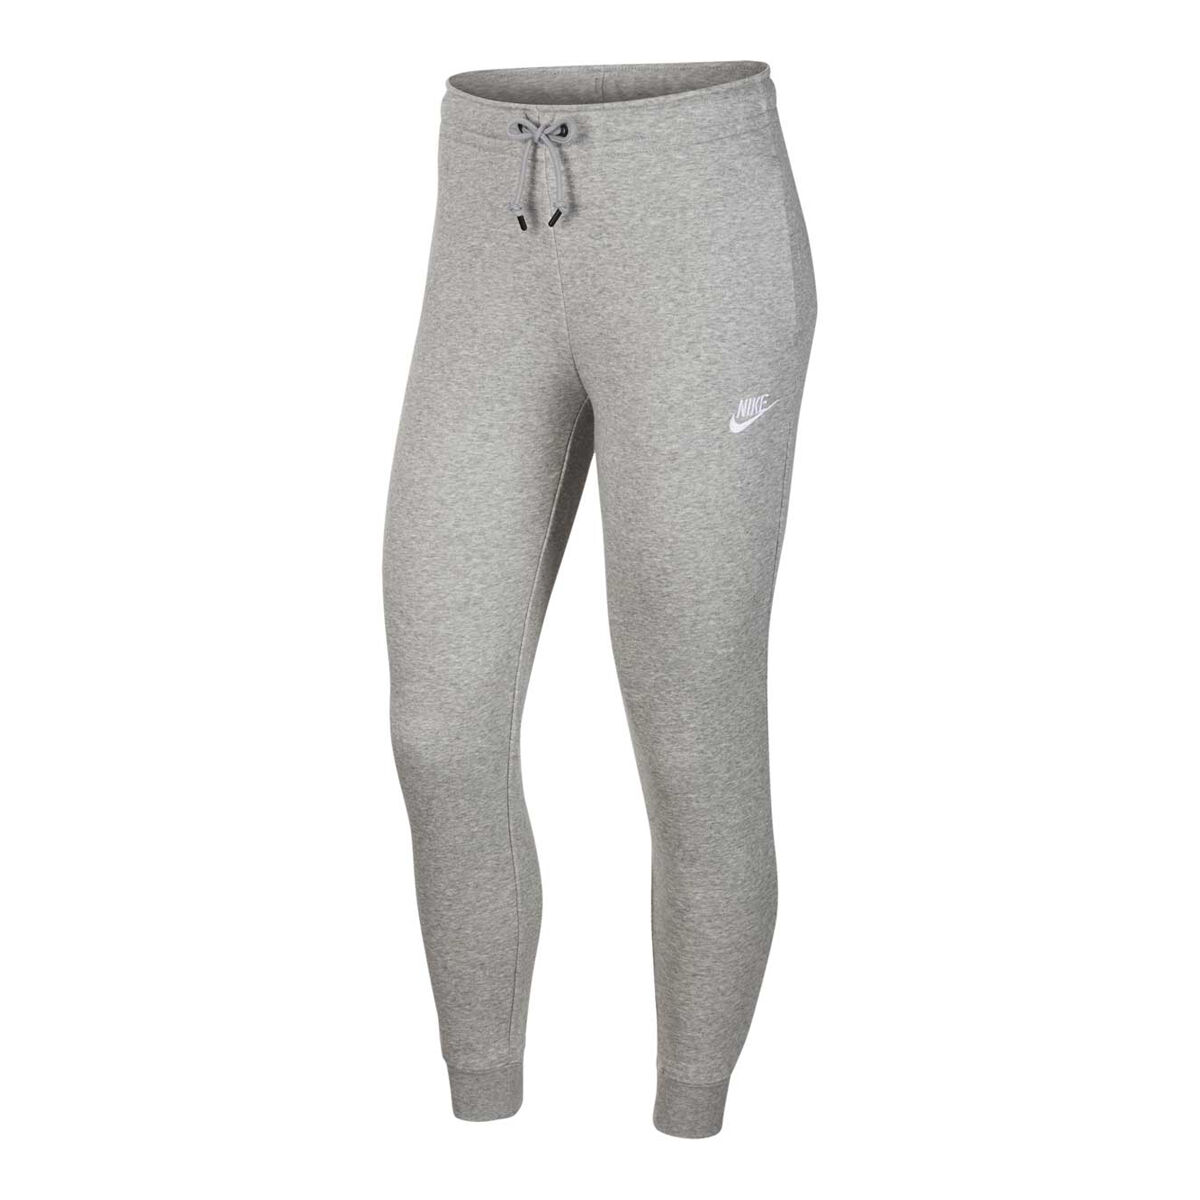 grey nike outfit for womens